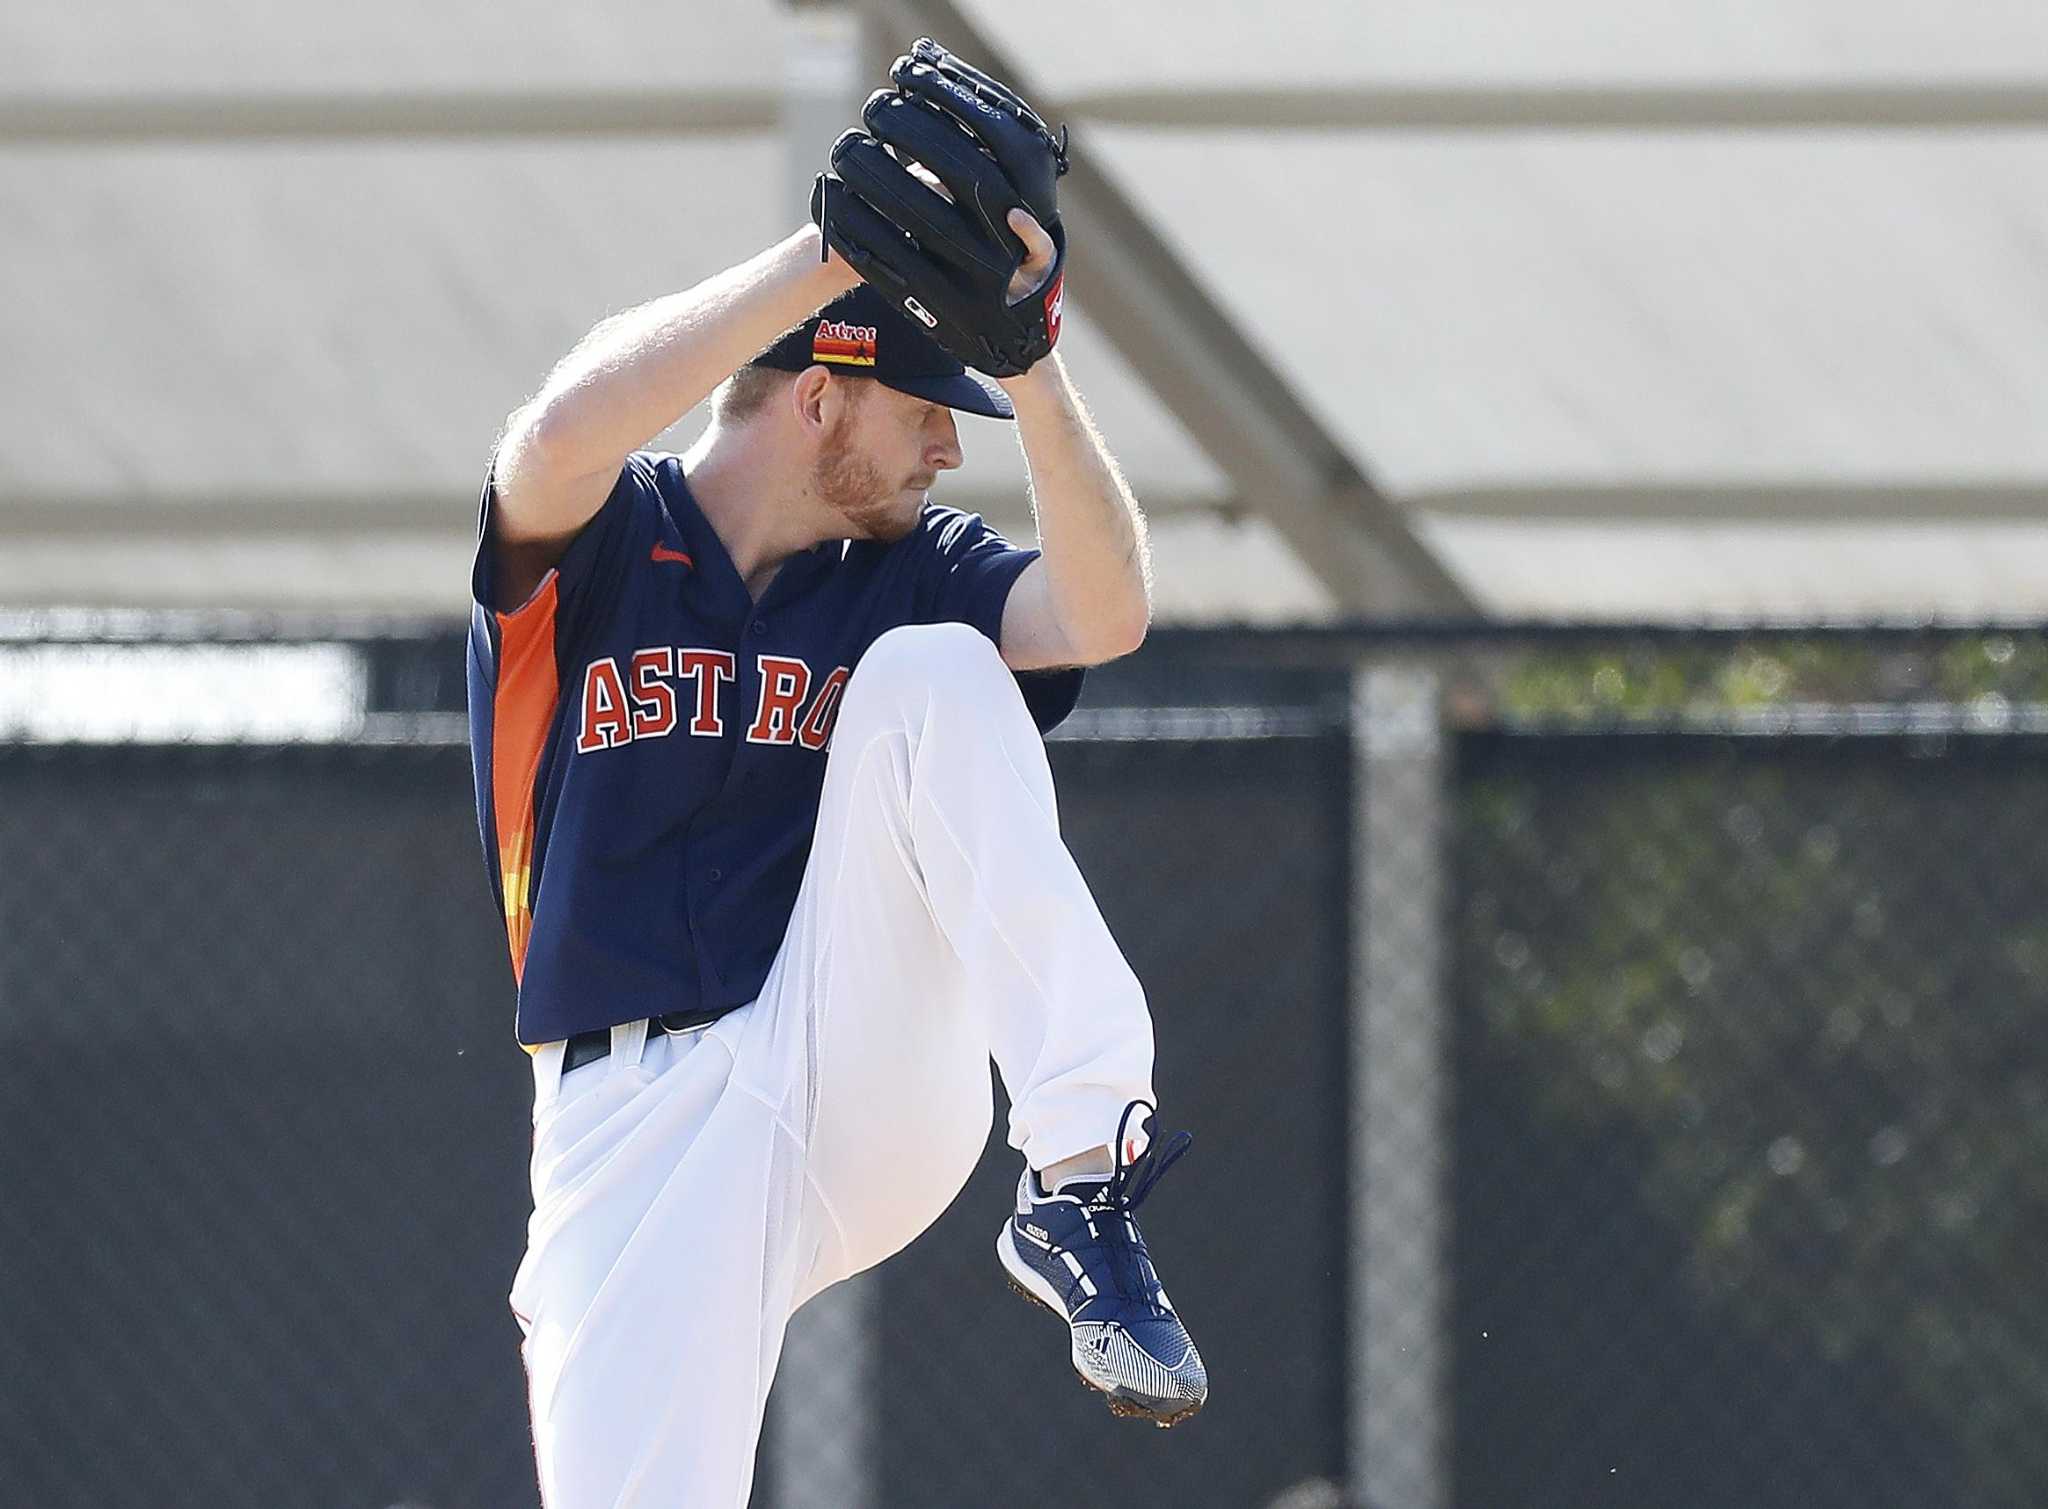 Unusual delivery just part of what makes Astros pitcher Tyler Ivey